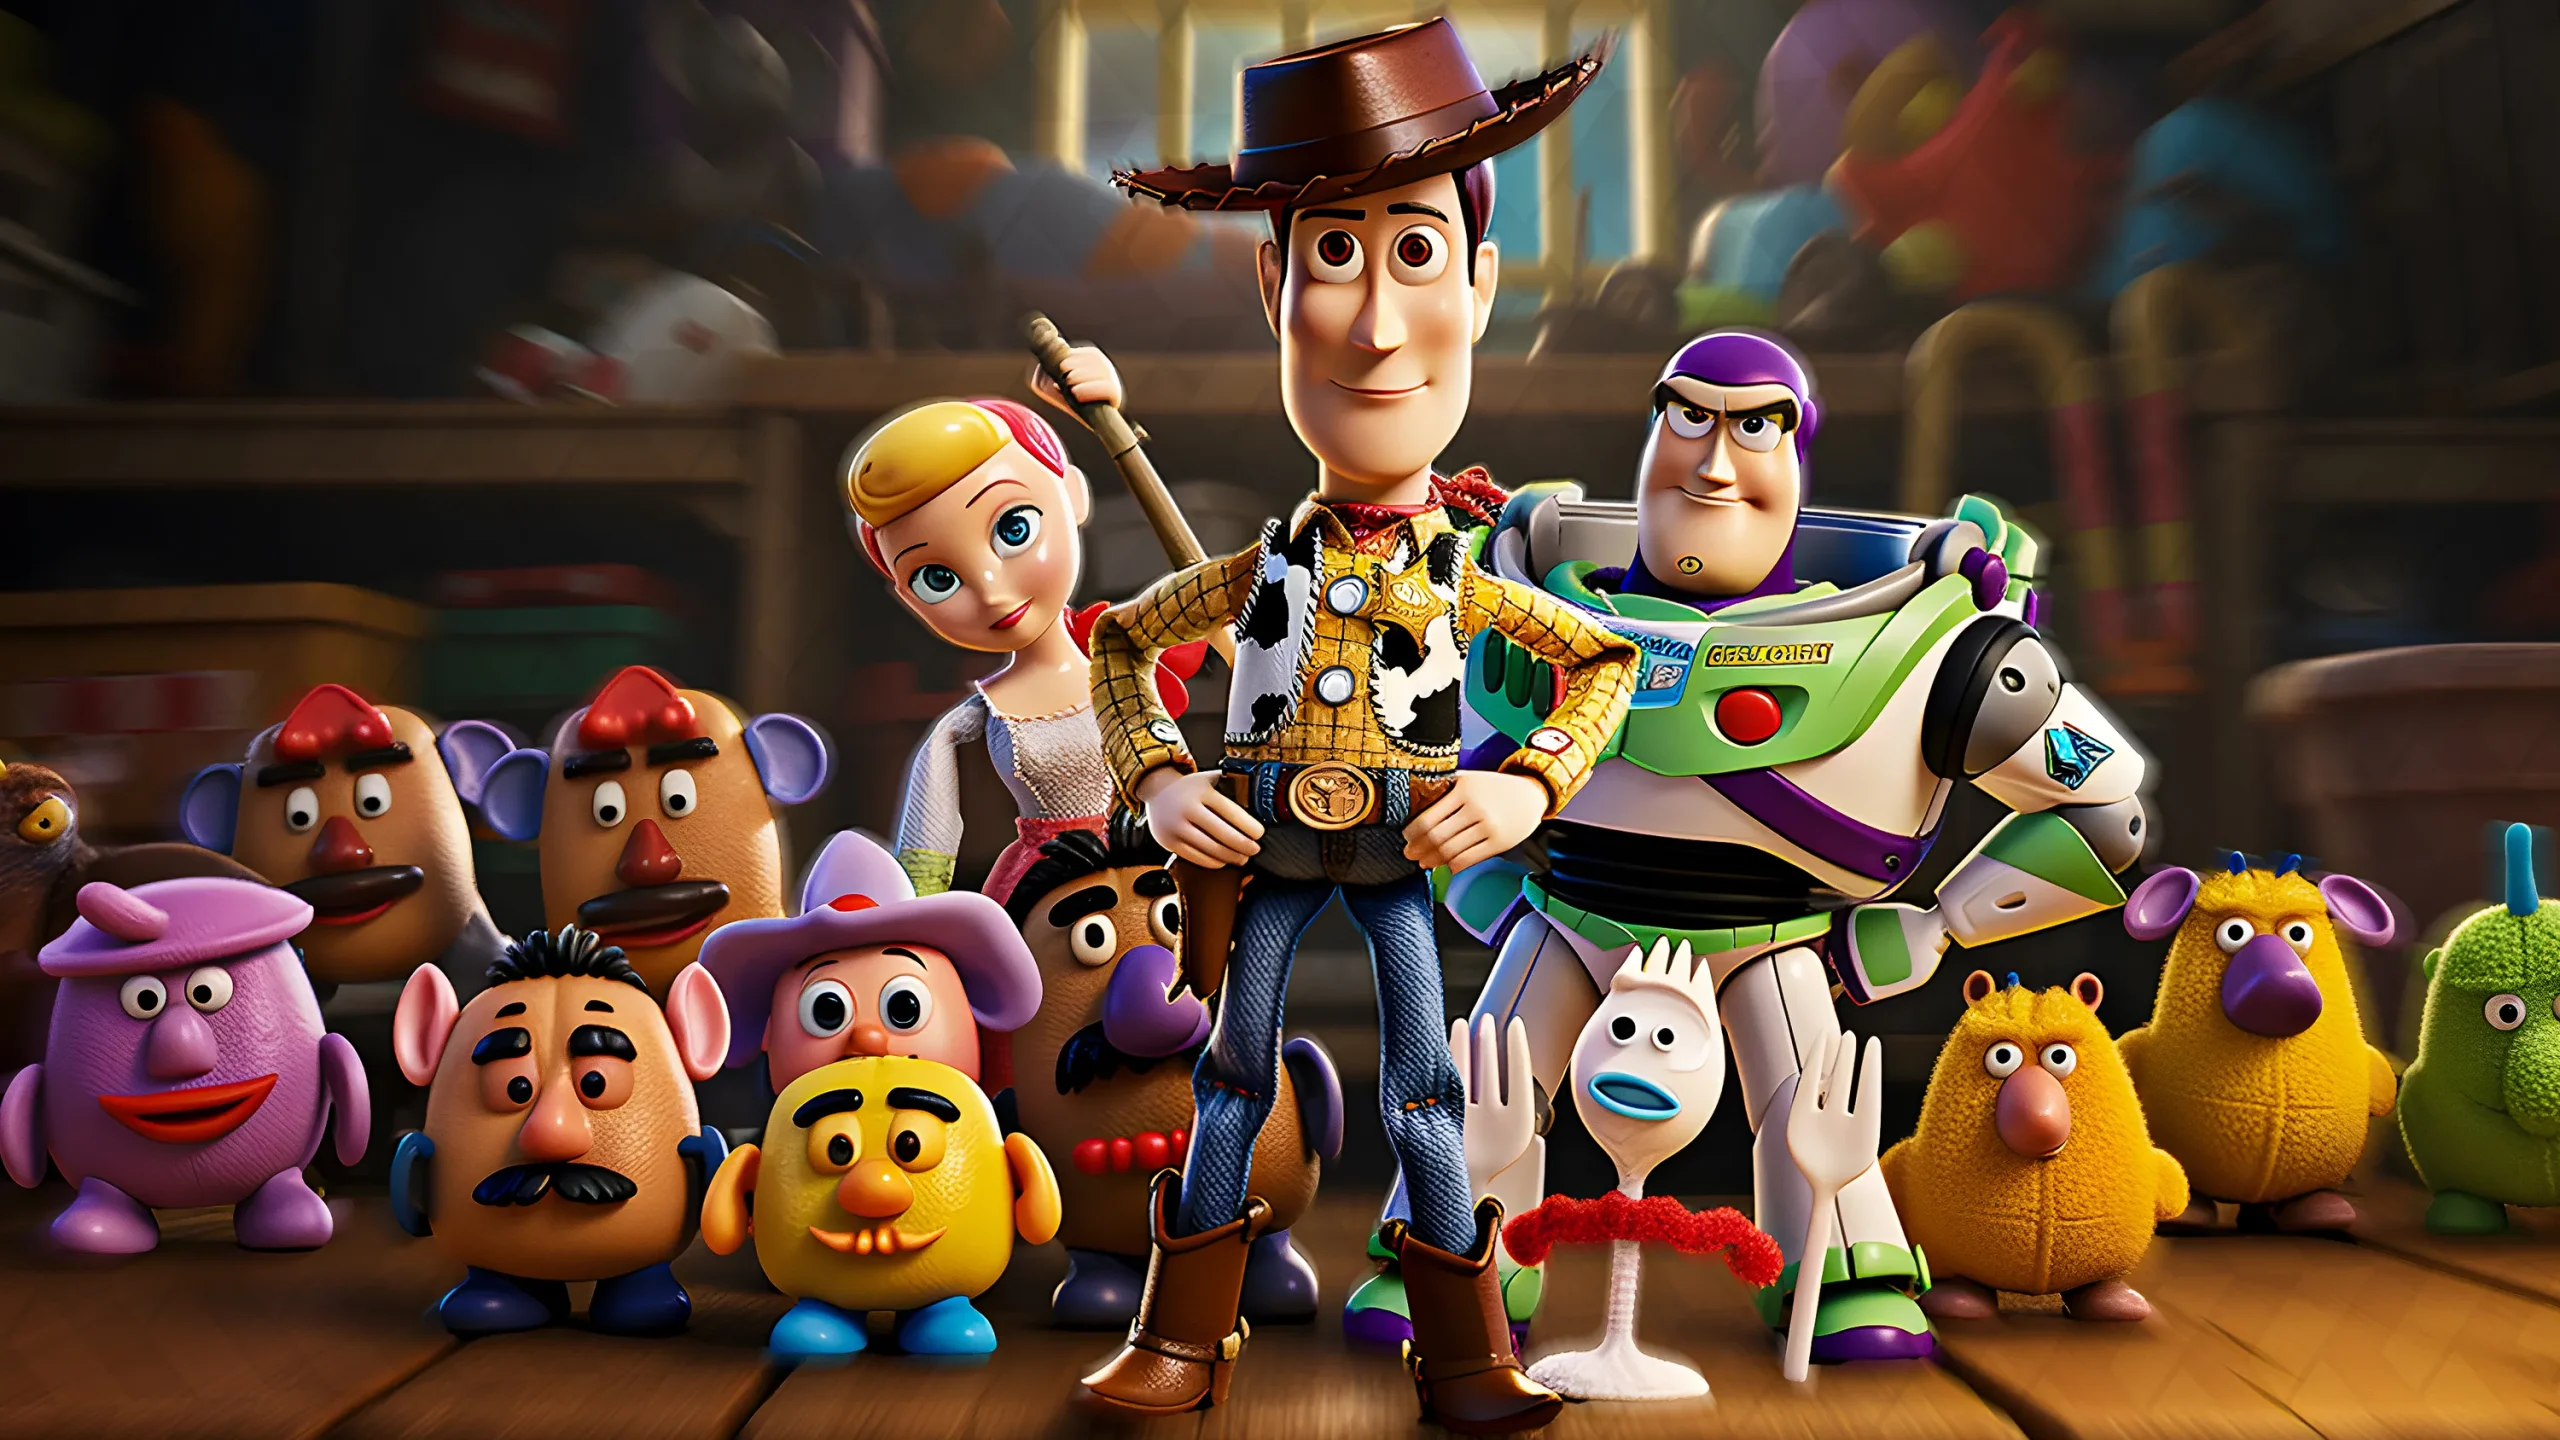 Toy Story 5 Buzz and Woody's Epic Return - Tim Allen Teases Exciting Developments2